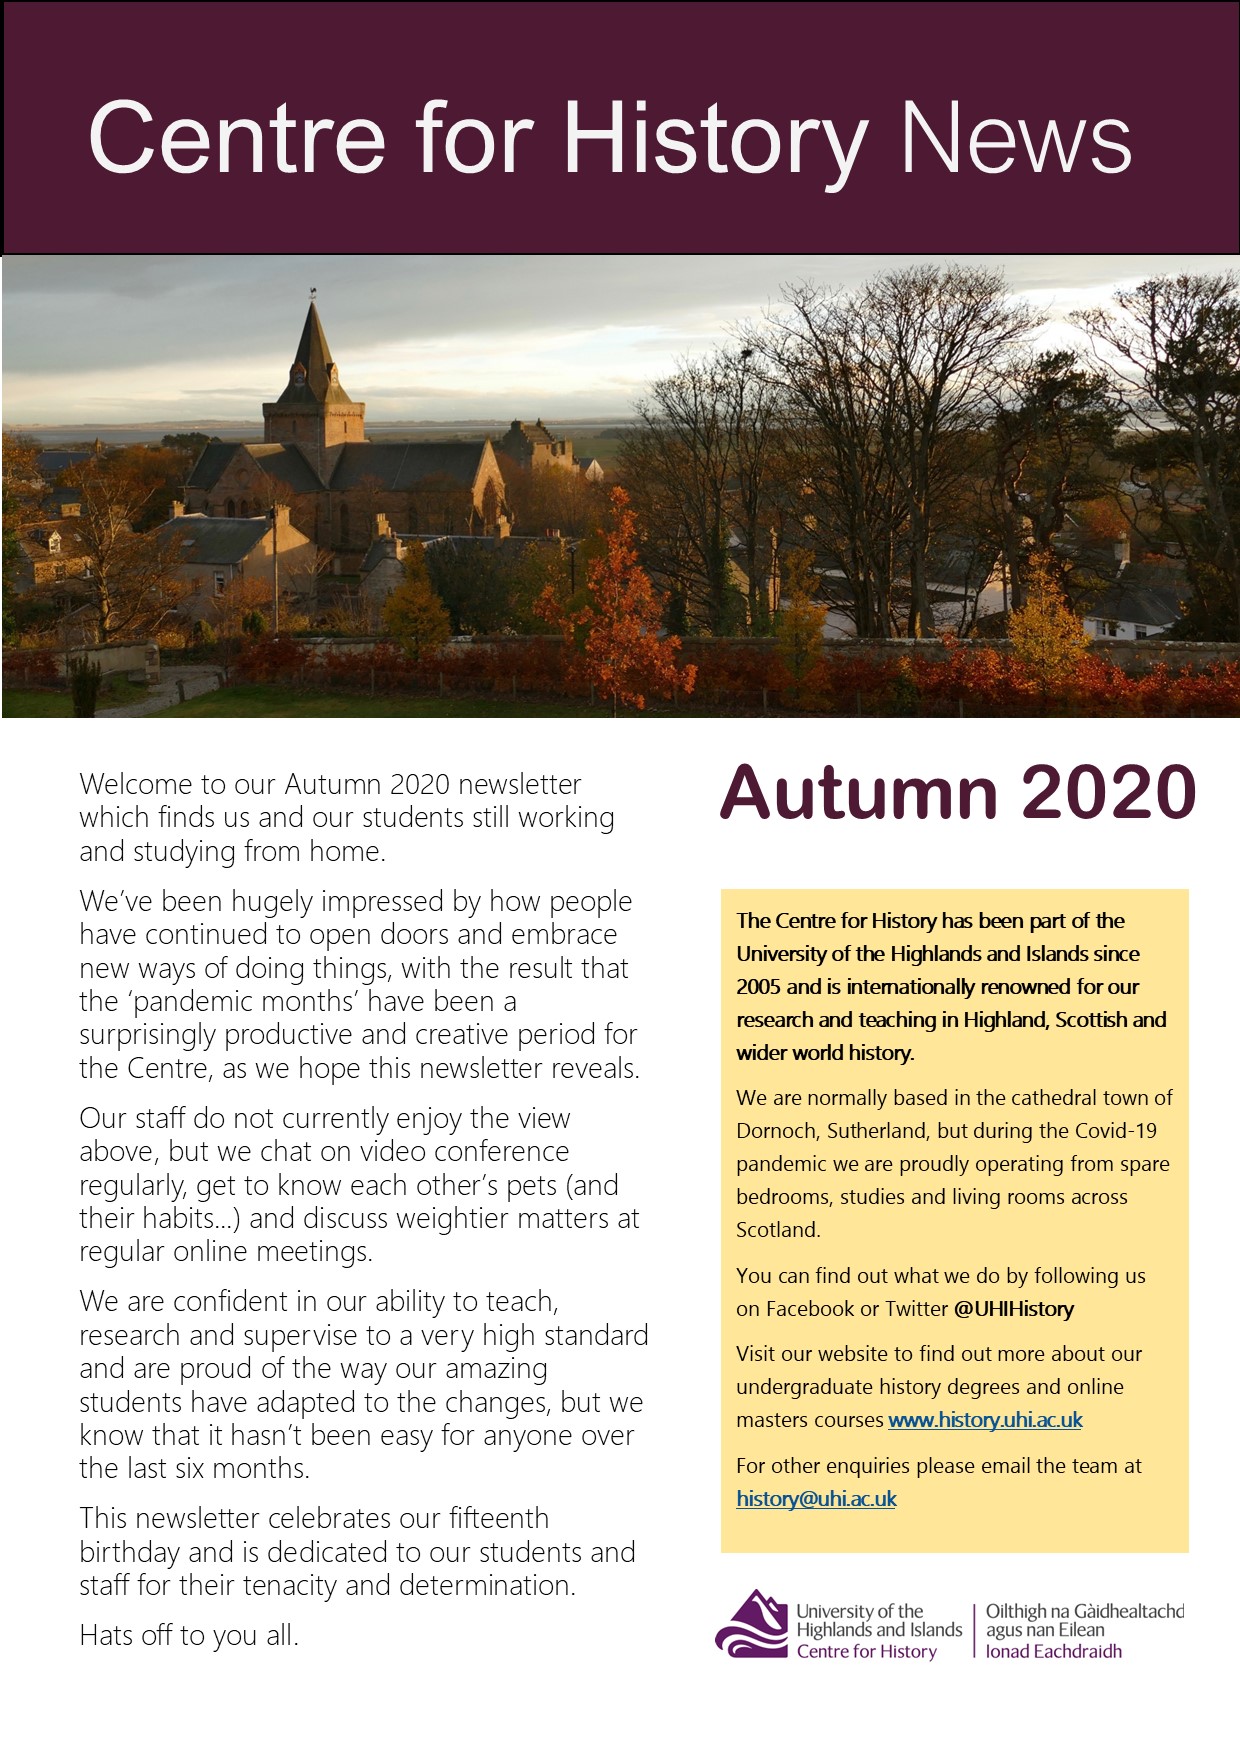 Centre for History News - autumn 2020